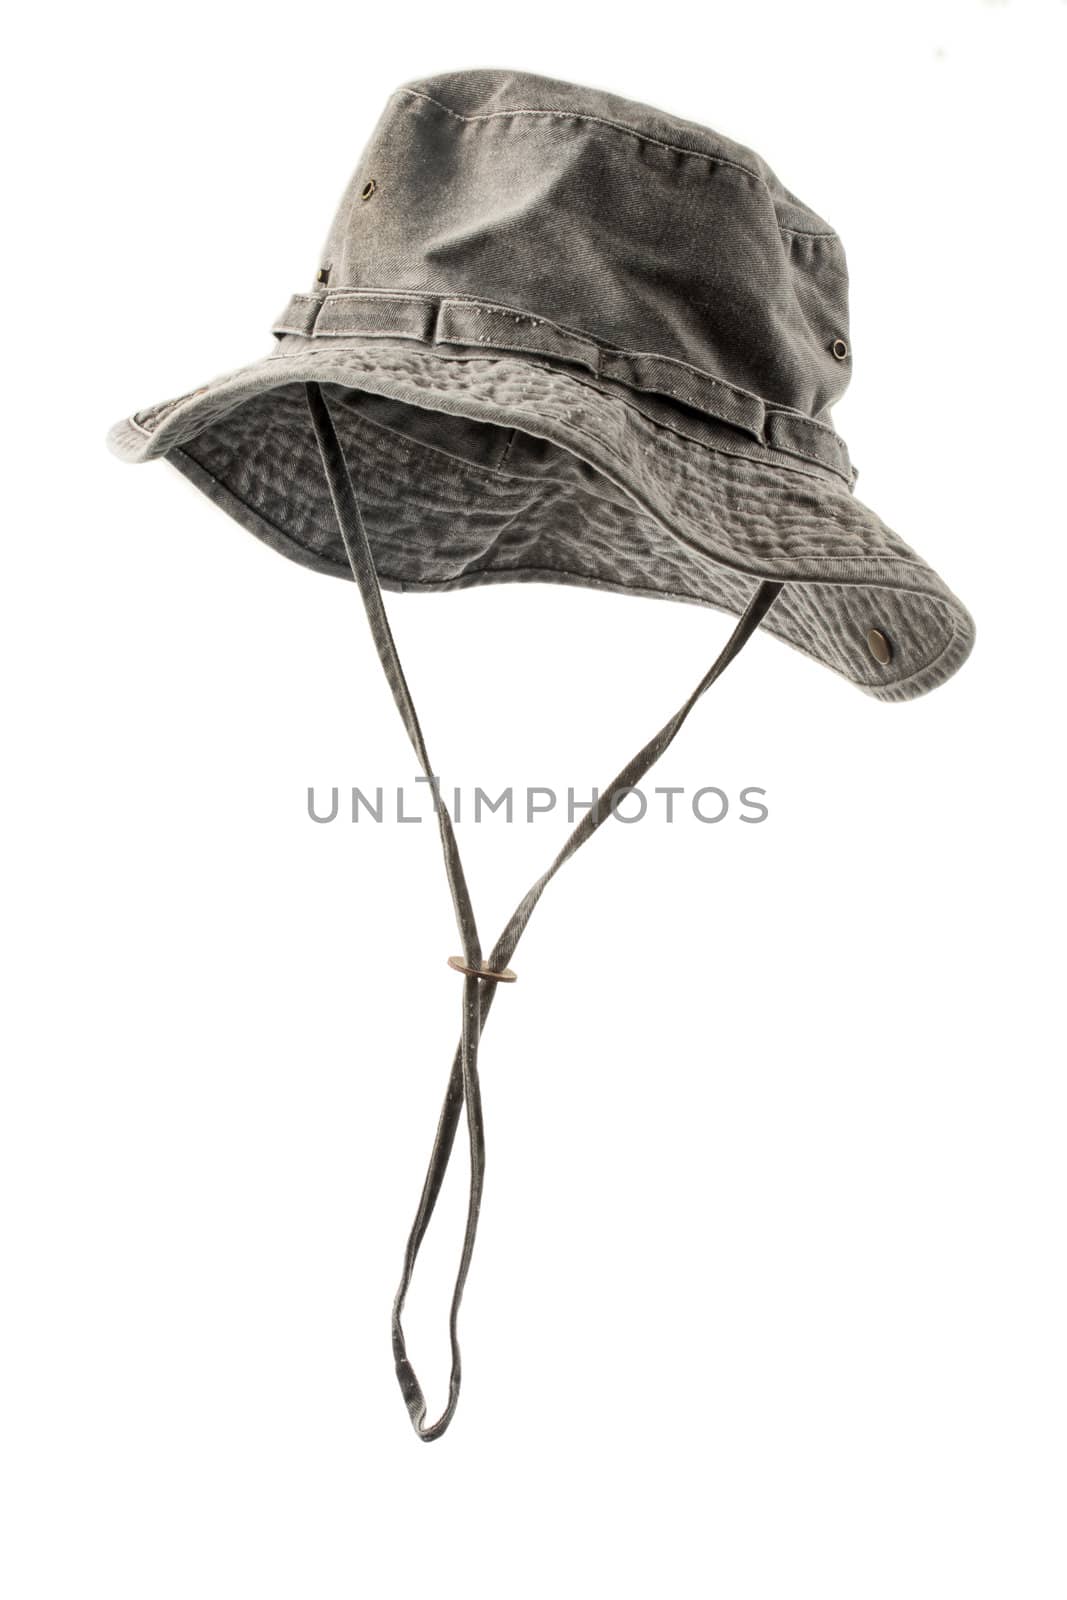 Boonie hat isolated on white background